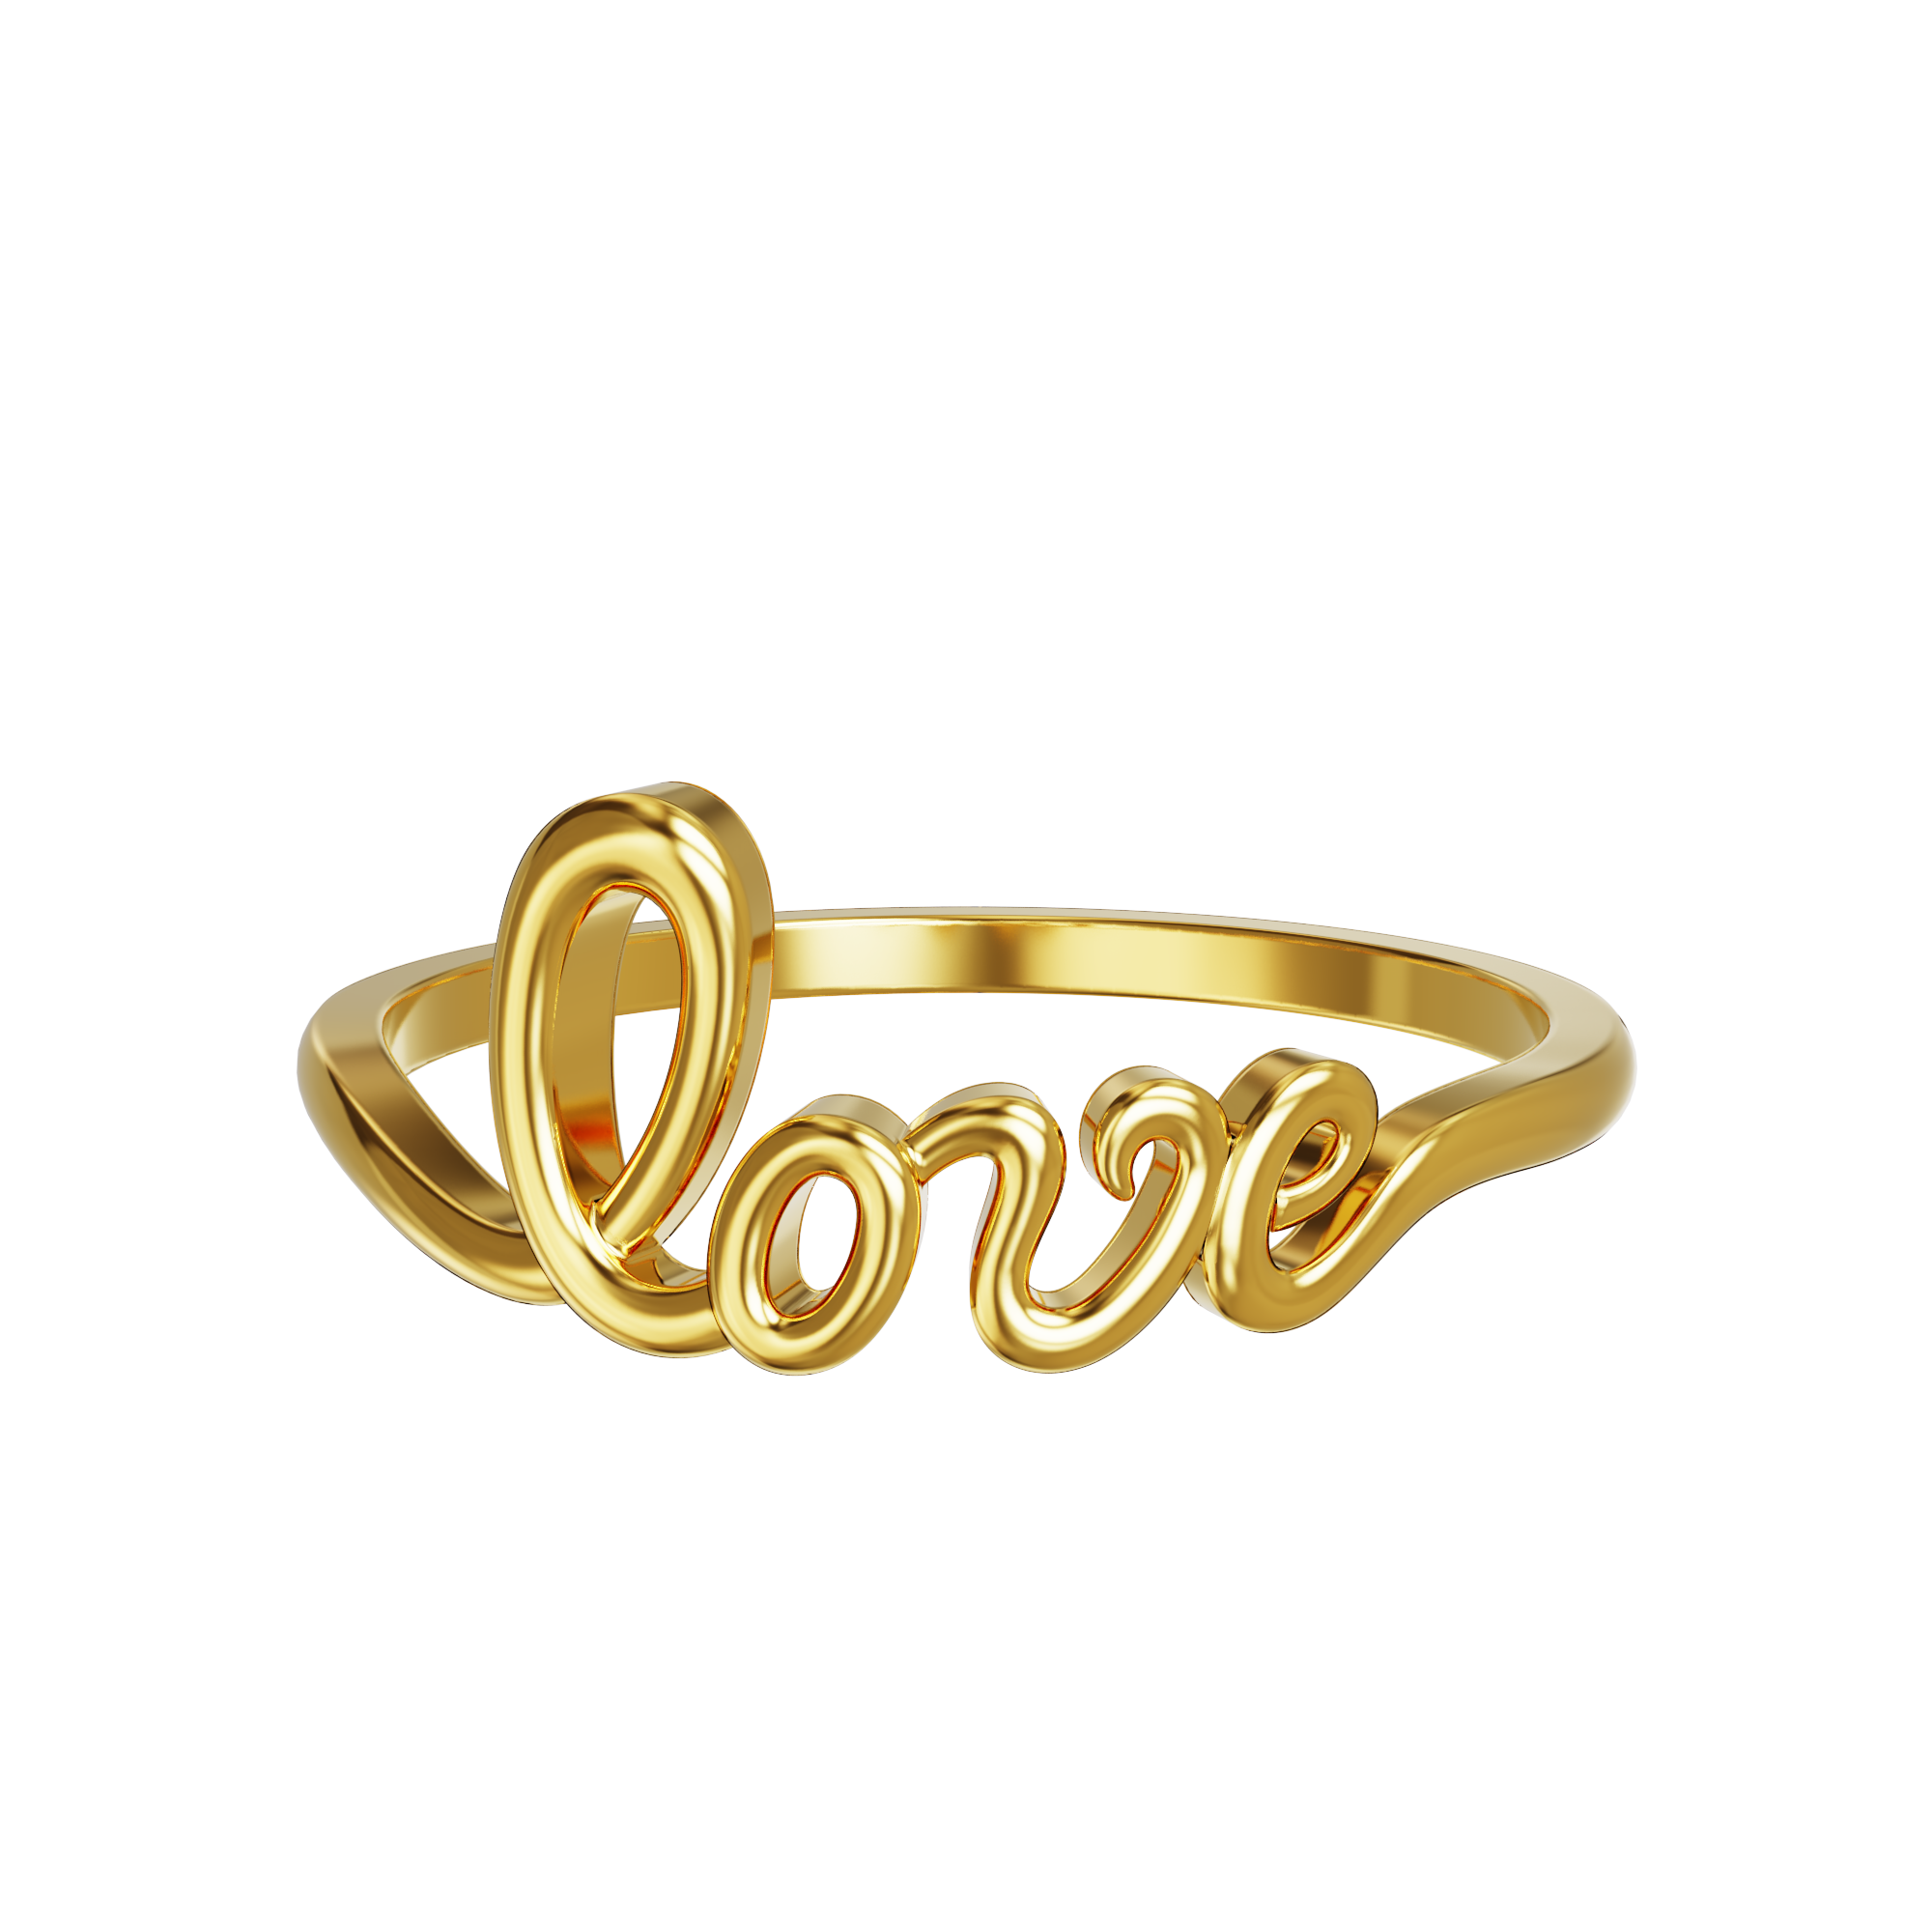 Authentic Cartier Love Ring 18k Rose Gold Size 55